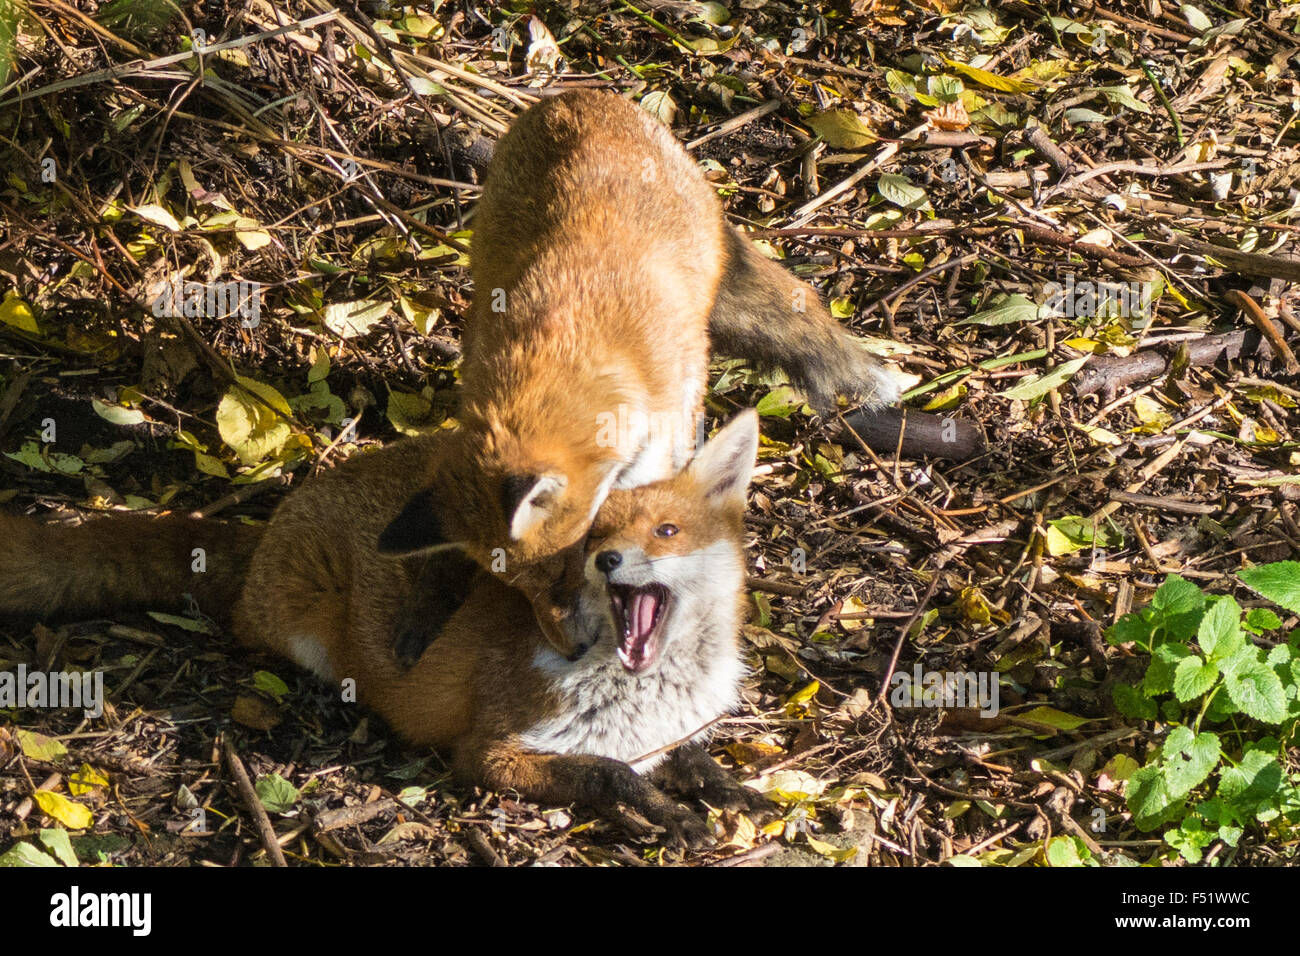 Tottenham, London, UK, 26th October 2015. Two urban foxes frolic together in a sunny autumn garden in Tottenham, London. Credit:  Patricia Phillips/Alamy Live News Stock Photo